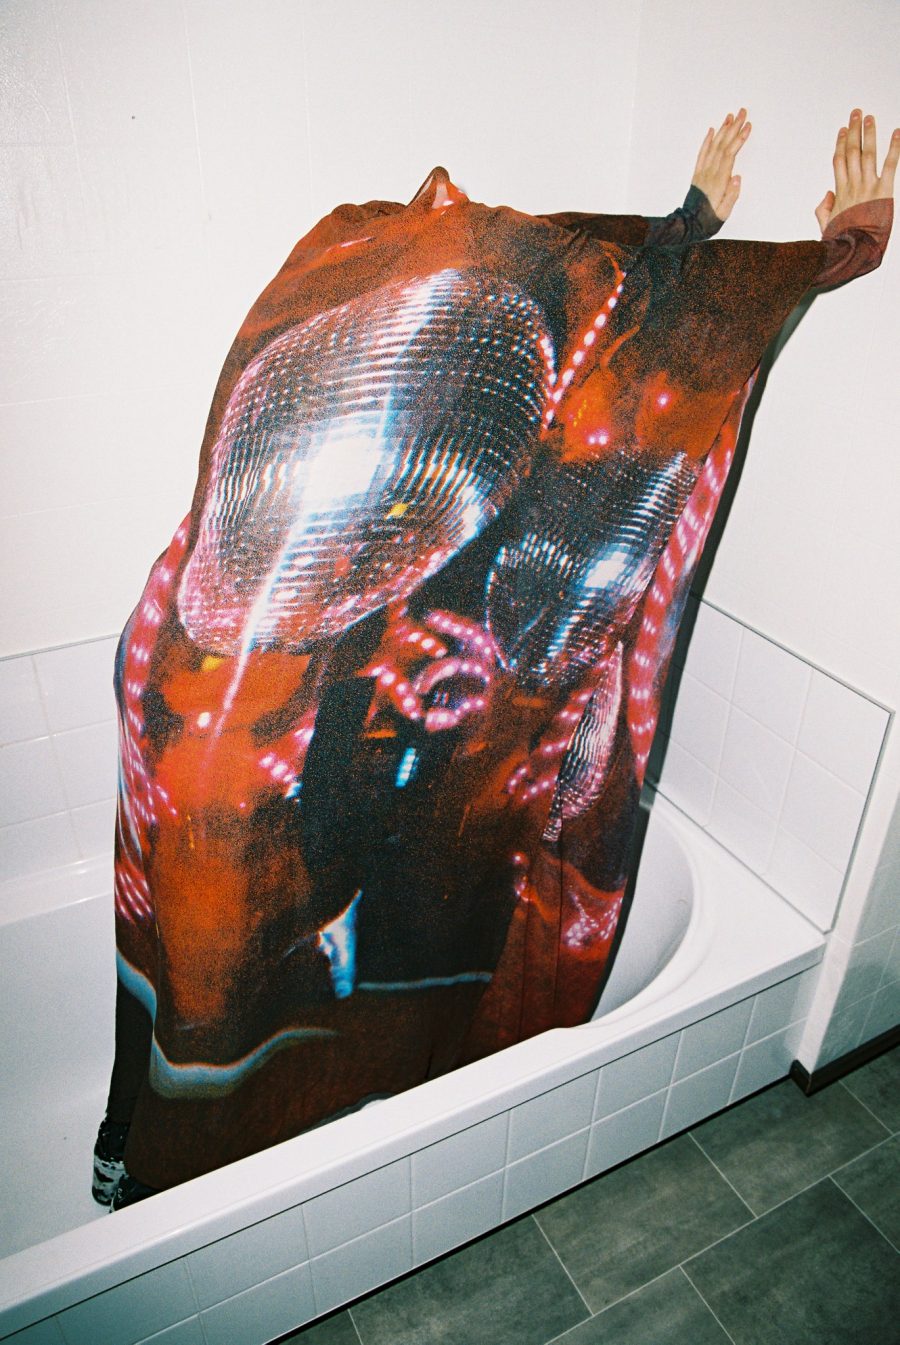 A person in a bathtub, obscured by fabric with a disco ball design on it.